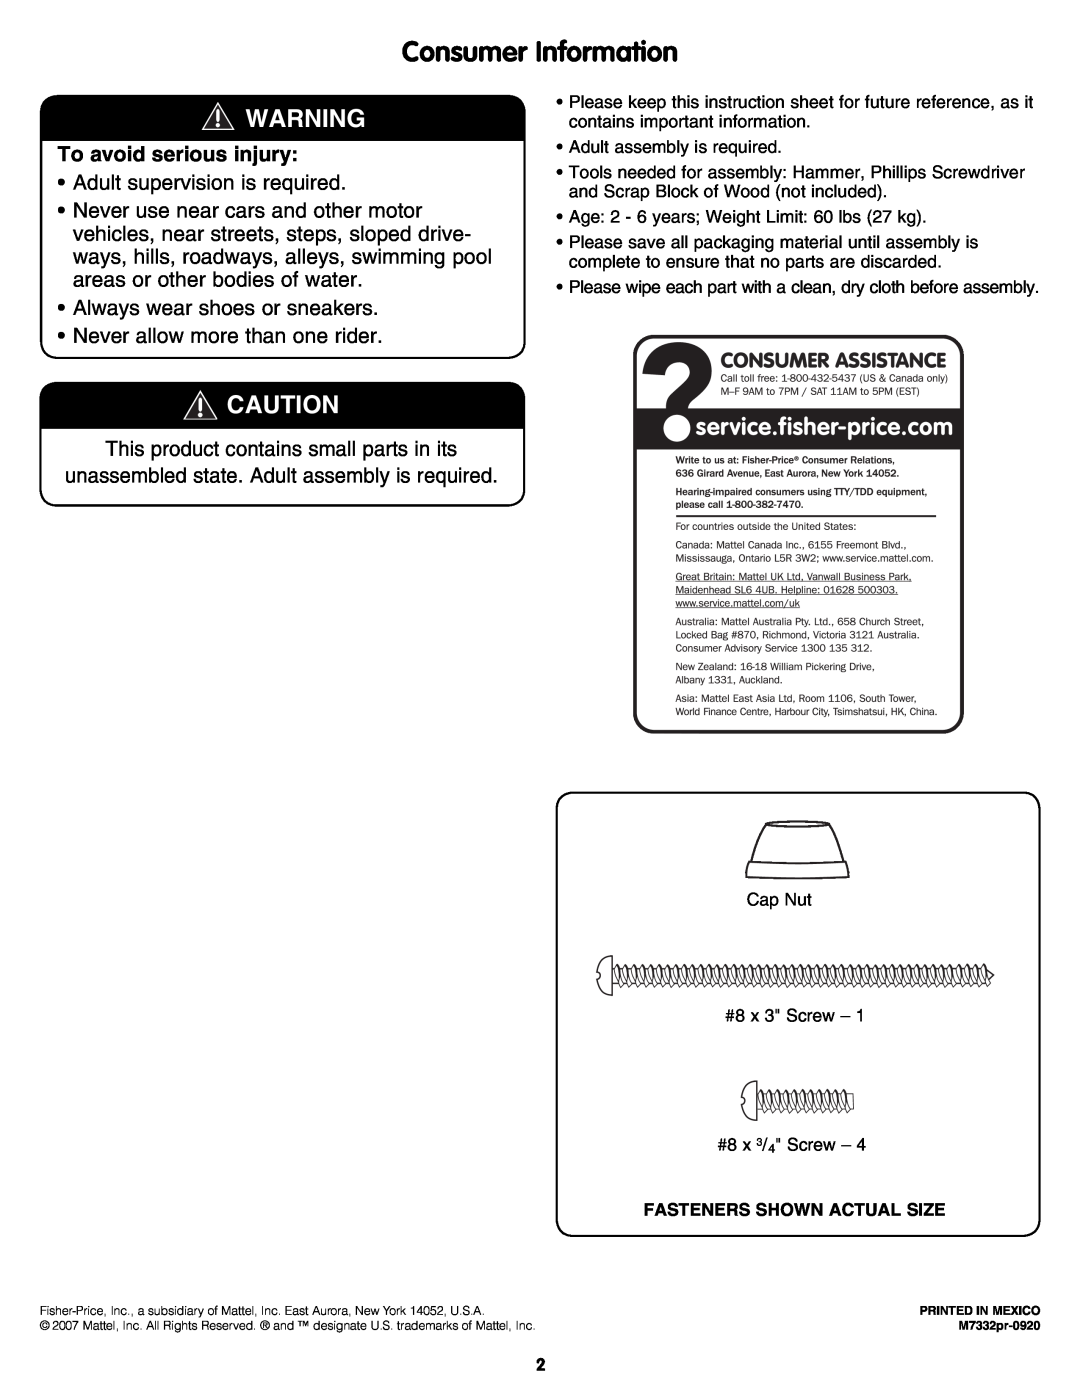 Fisher-Price M7332 manual Consumer Information, To avoid serious injury 